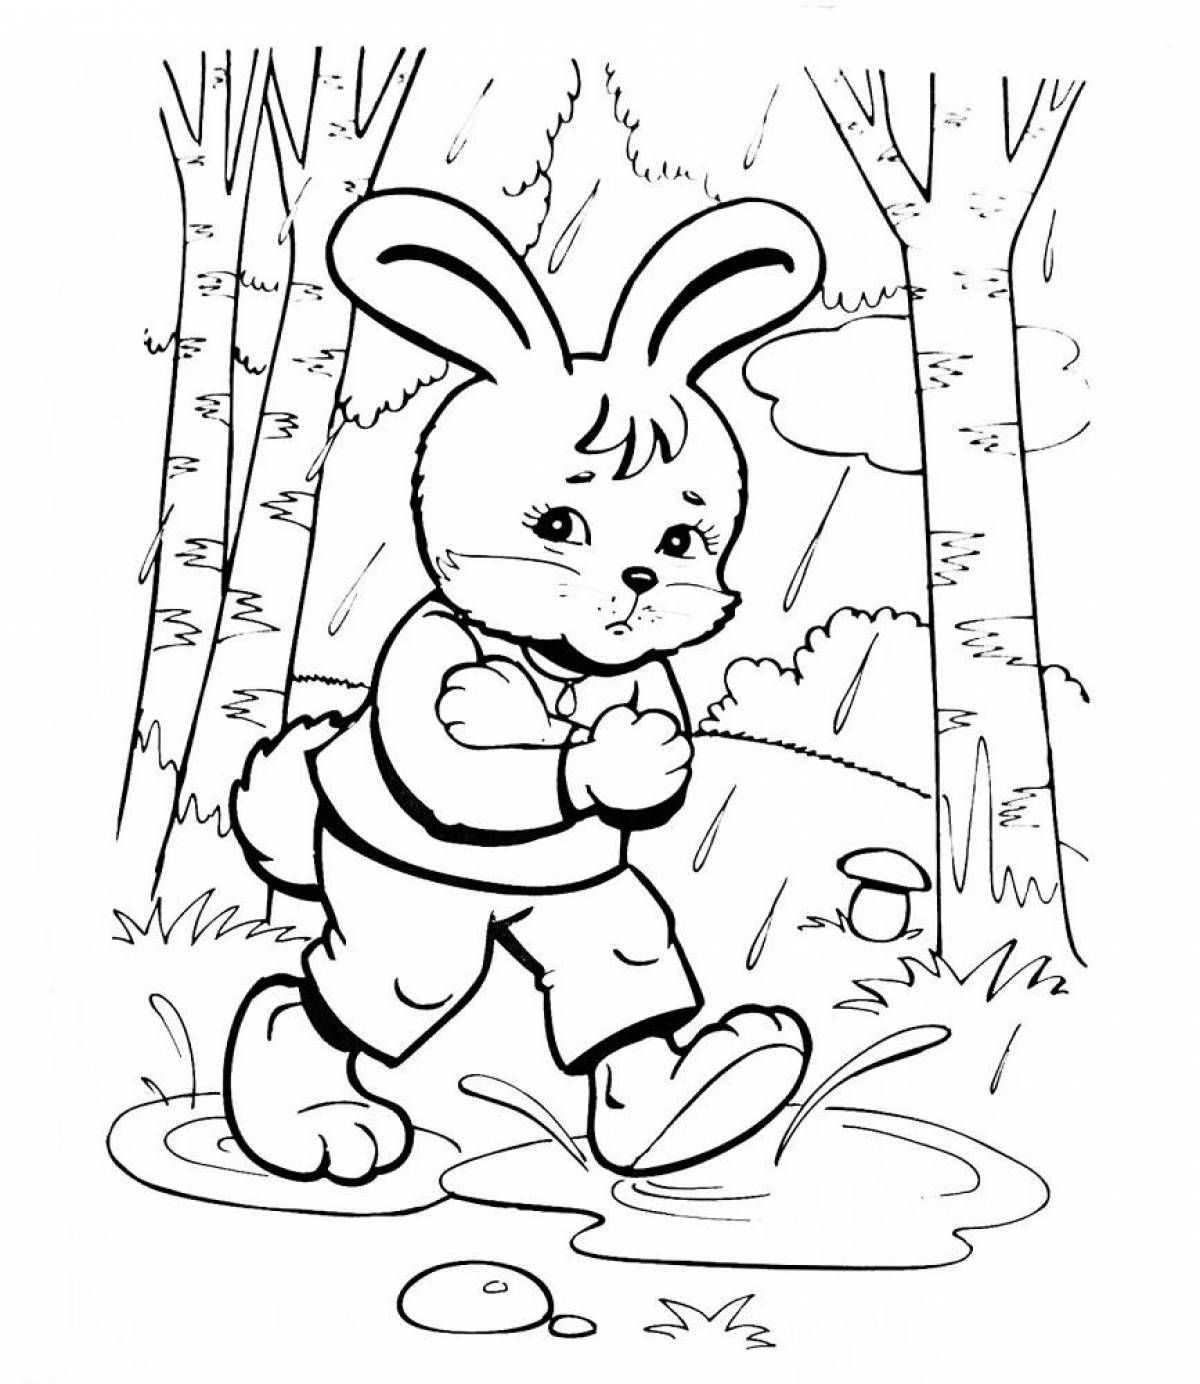 Fancy rabbit coloring page